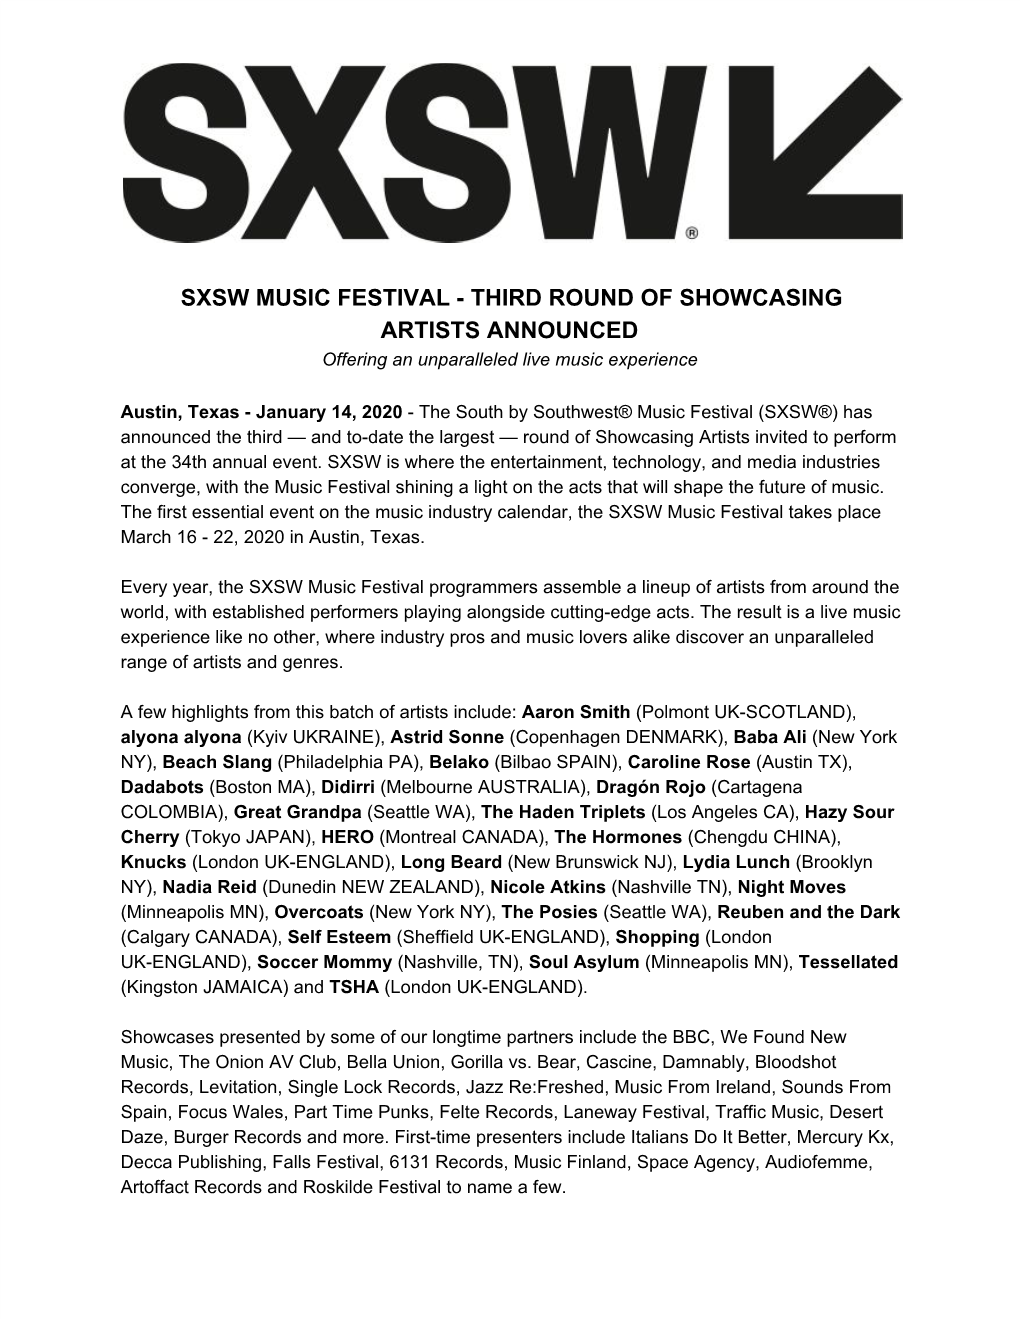 SXSW MUSIC FESTIVAL - THIRD ROUND of SHOWCASING ARTISTS ANNOUNCED Offering an Unparalleled Live Music Experience